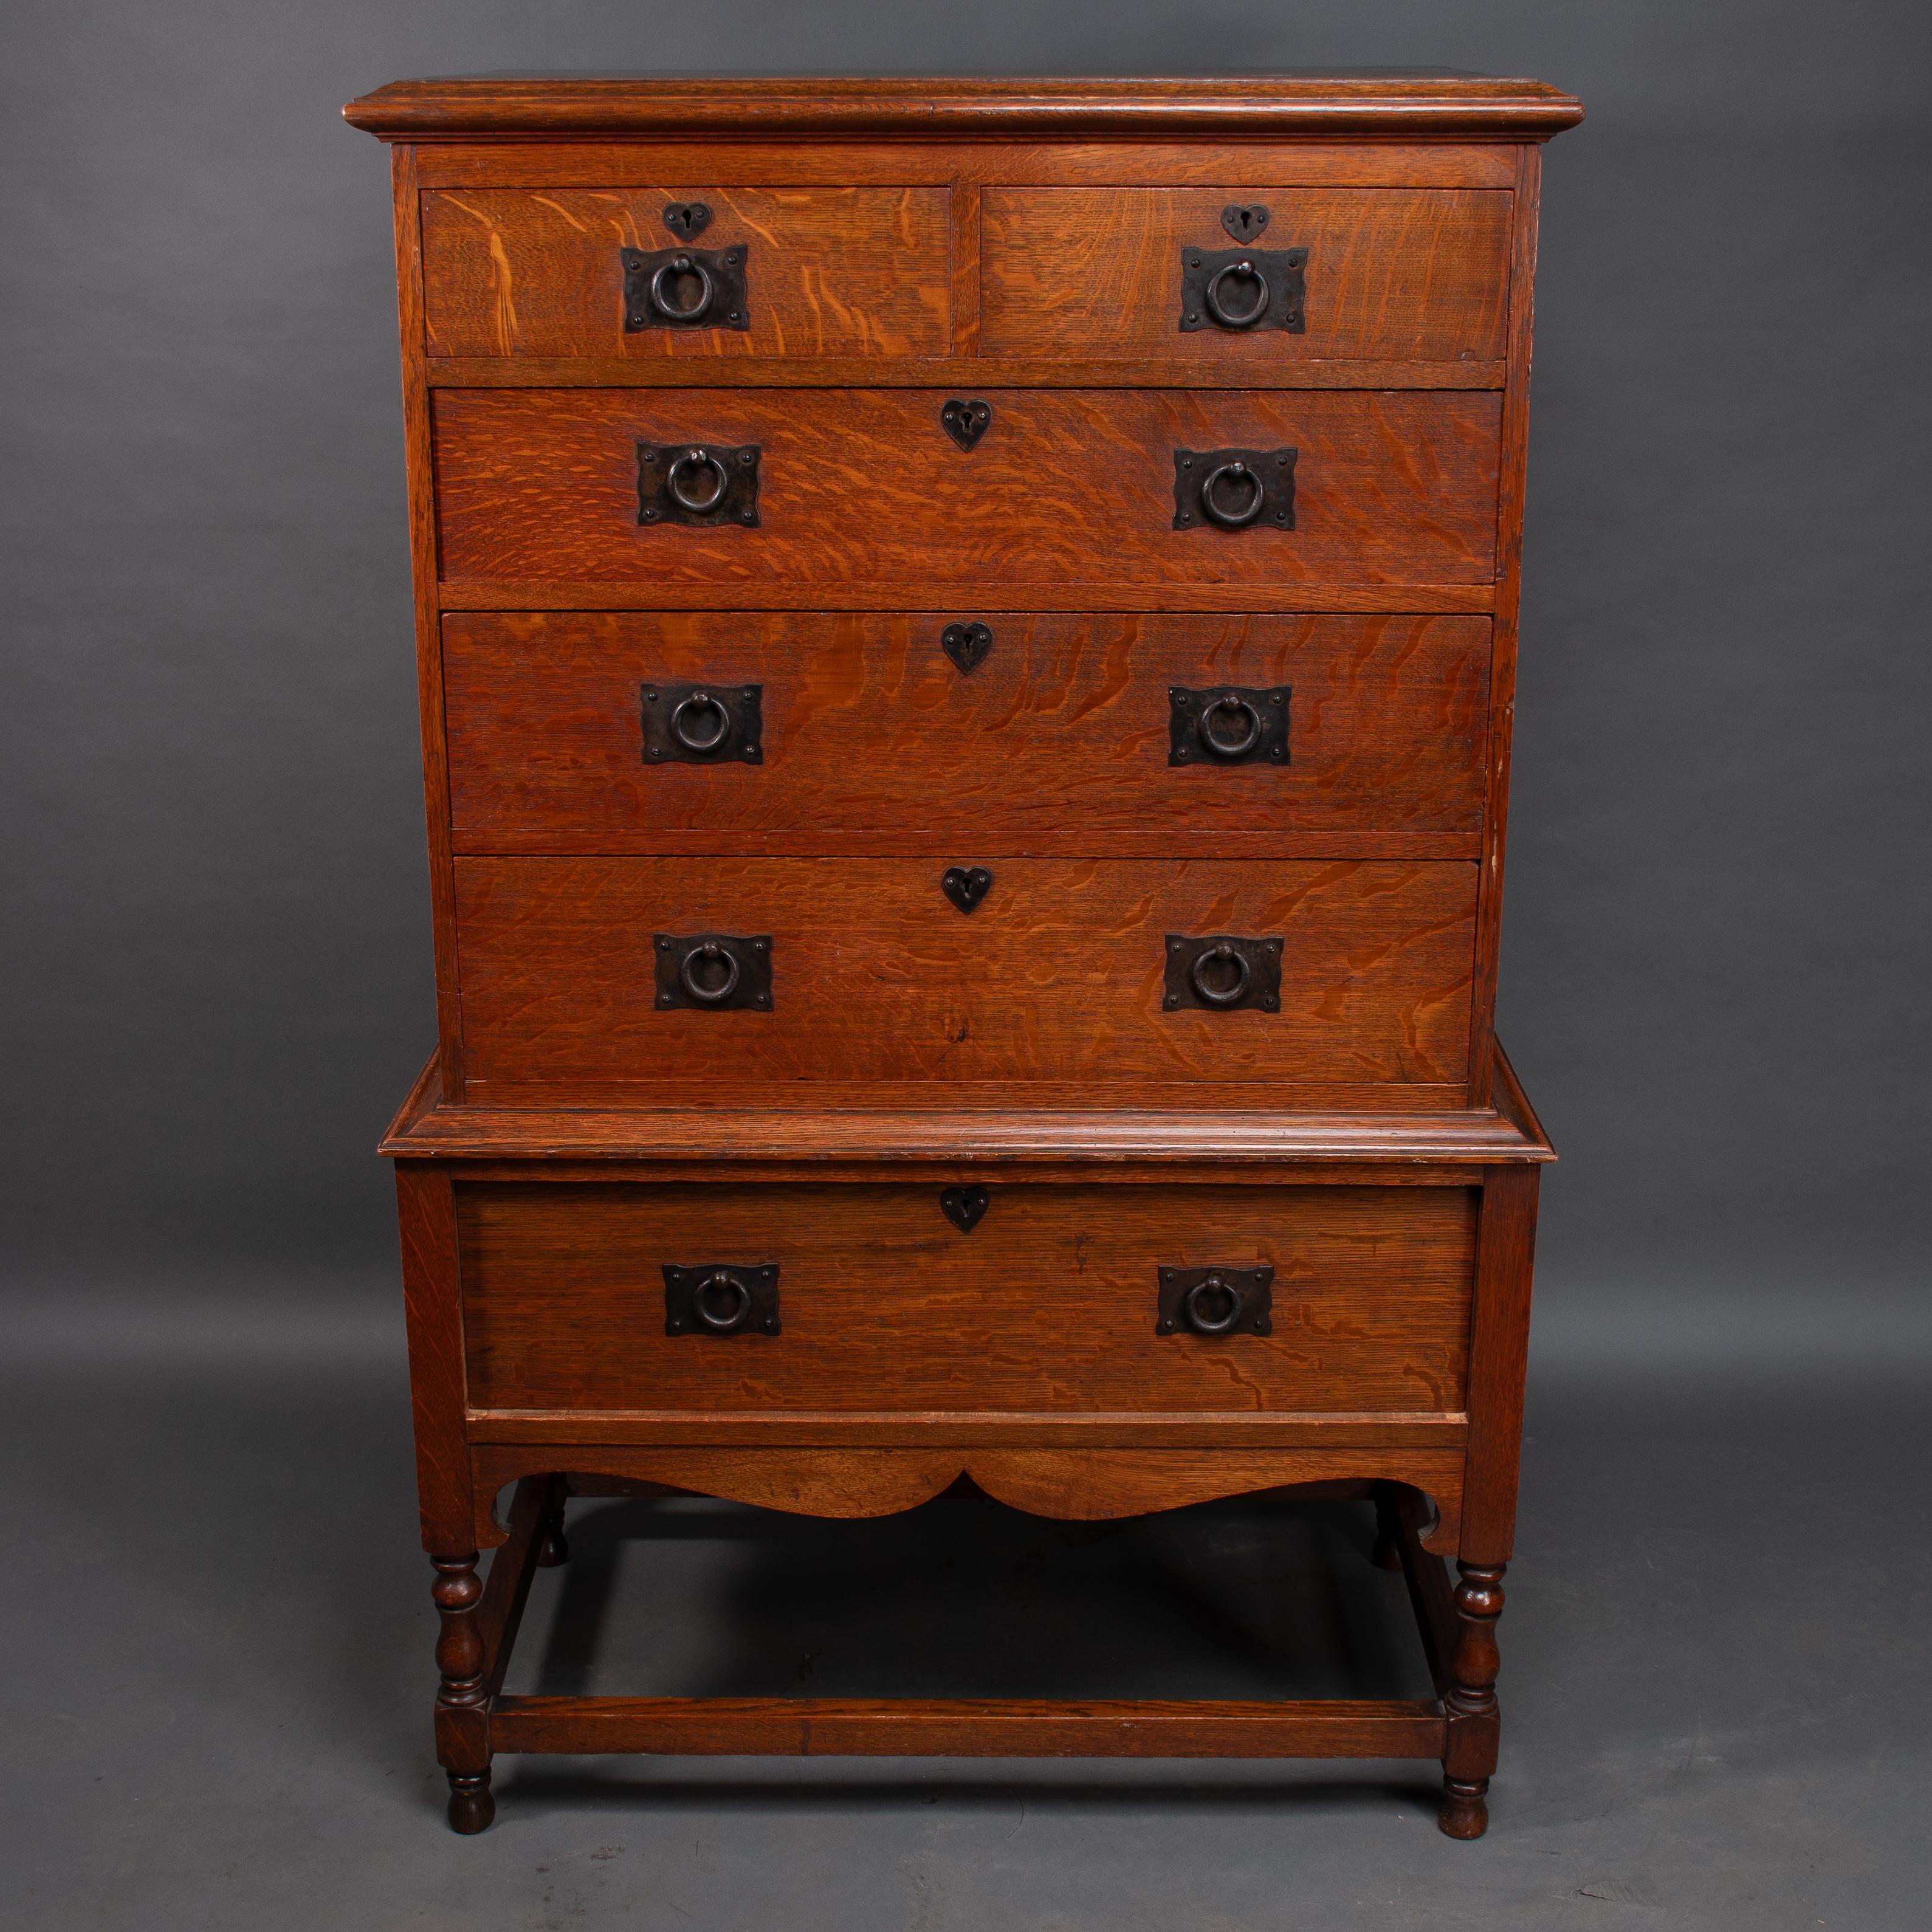 Ambrose Heal A Rare Mansfield oak chest of drawers with Iron heart escutcheons and handles in wonderful original condition. The quality is very high using beautifully figured quarter-sawn oak right down to the drawer sides and bottoms.
Separates